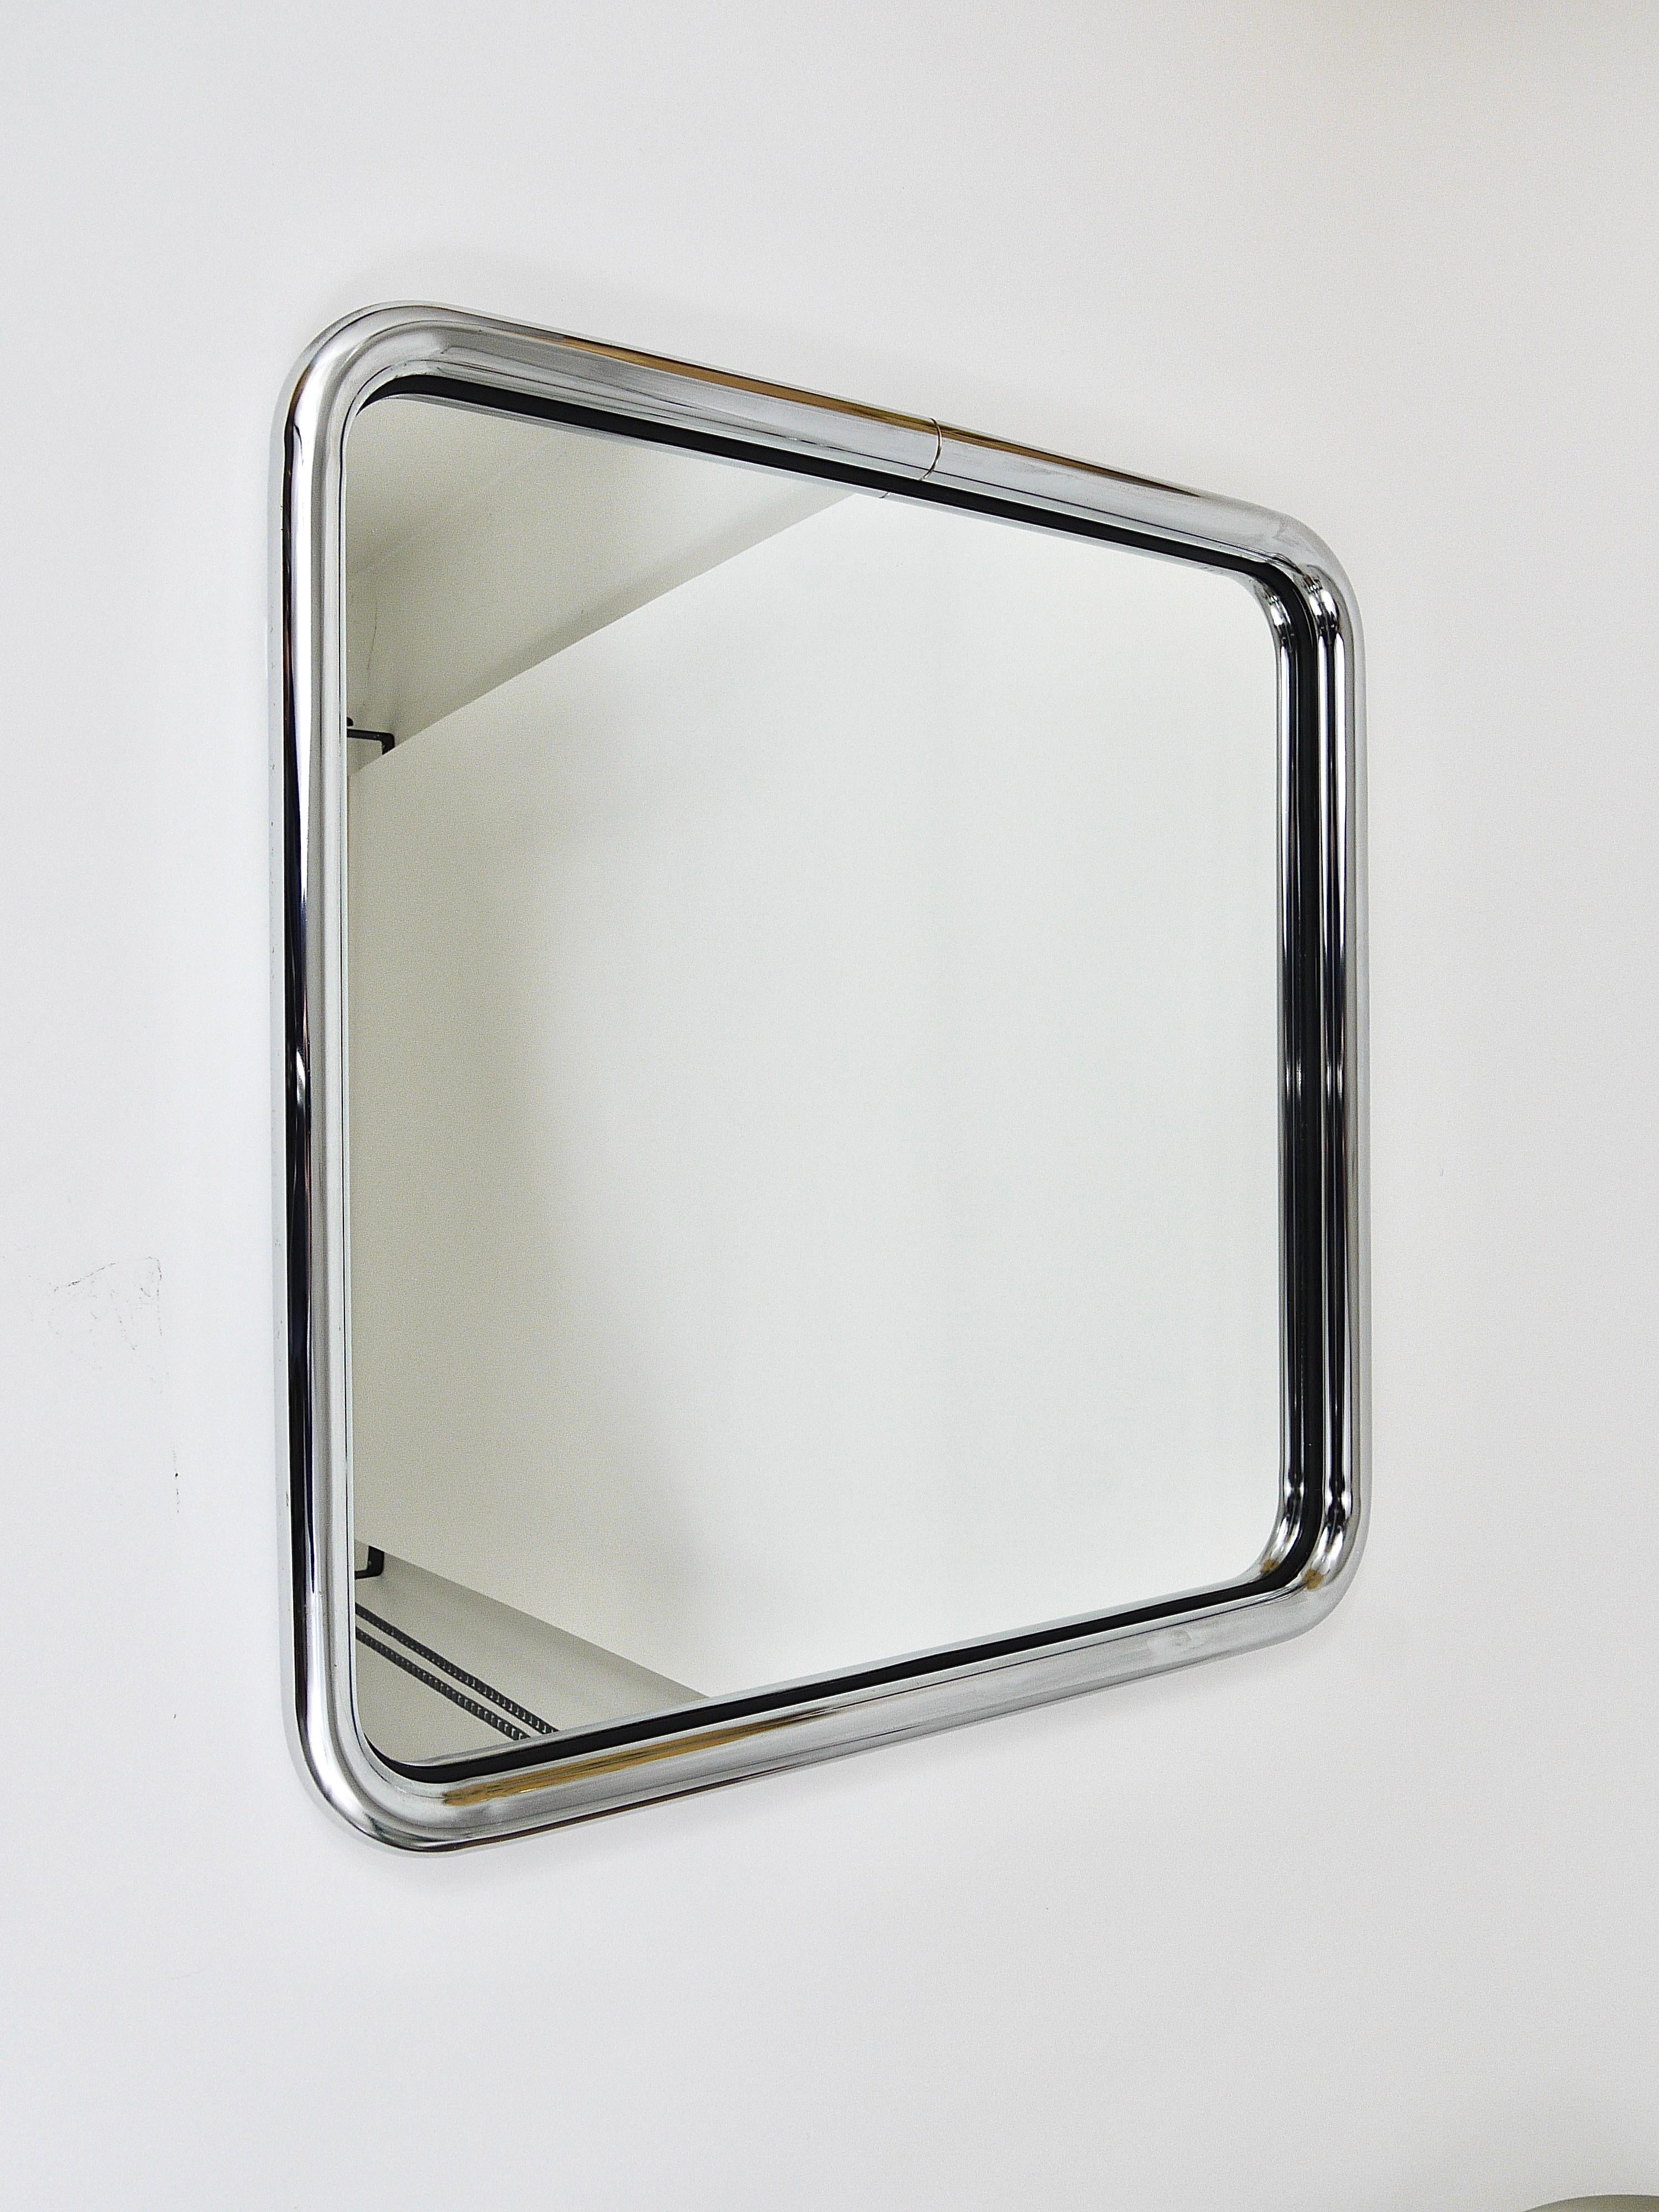 20th Century Post-Modern Square Chromed Tubular Steel Wall Mirror from the 1970s